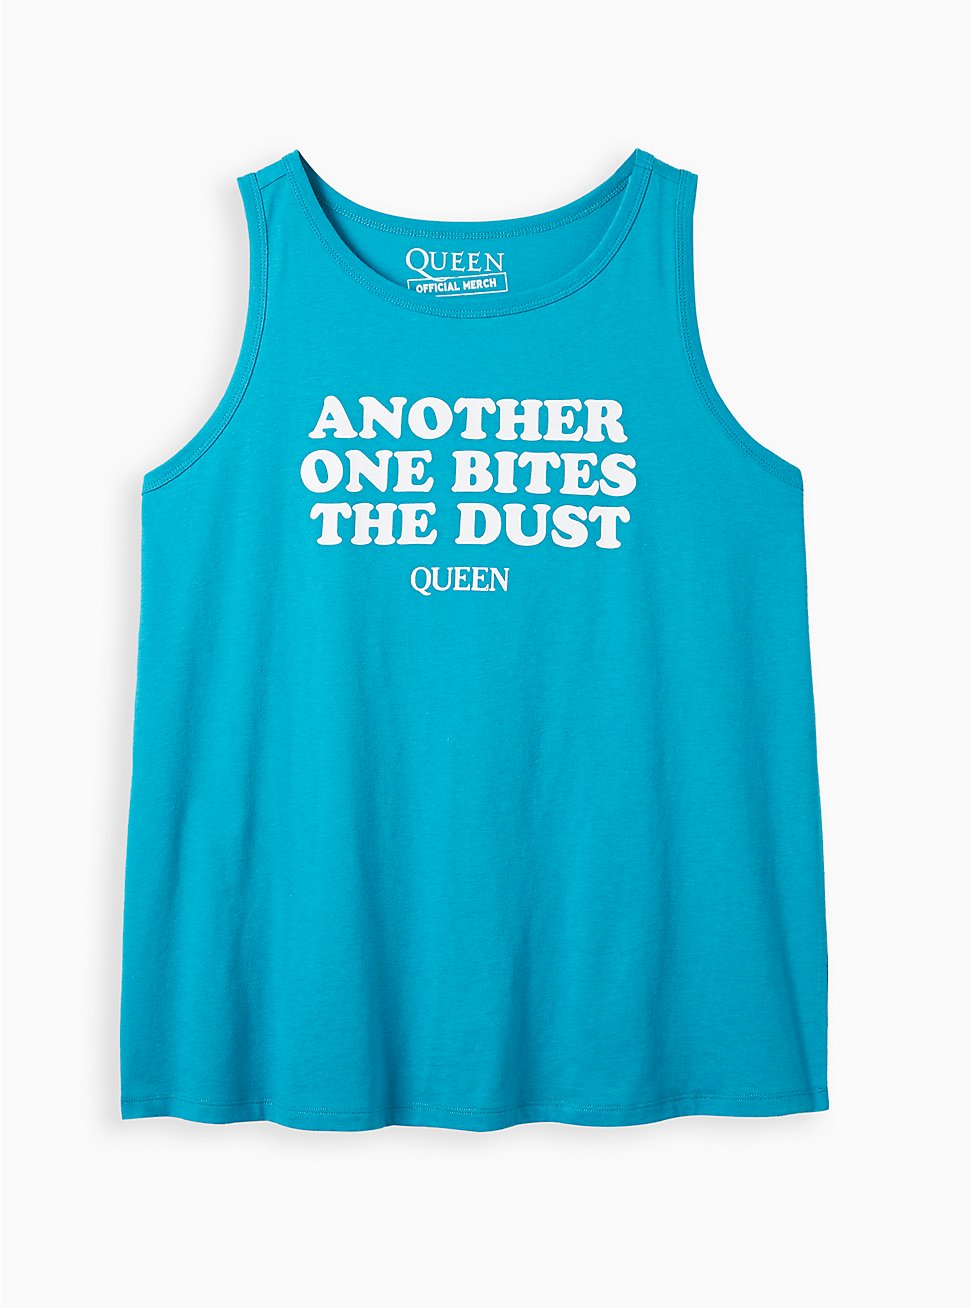 Queen Classic Crew Tank - Cotton Bites The Dust Teal, TEAL BLUE, hi-res